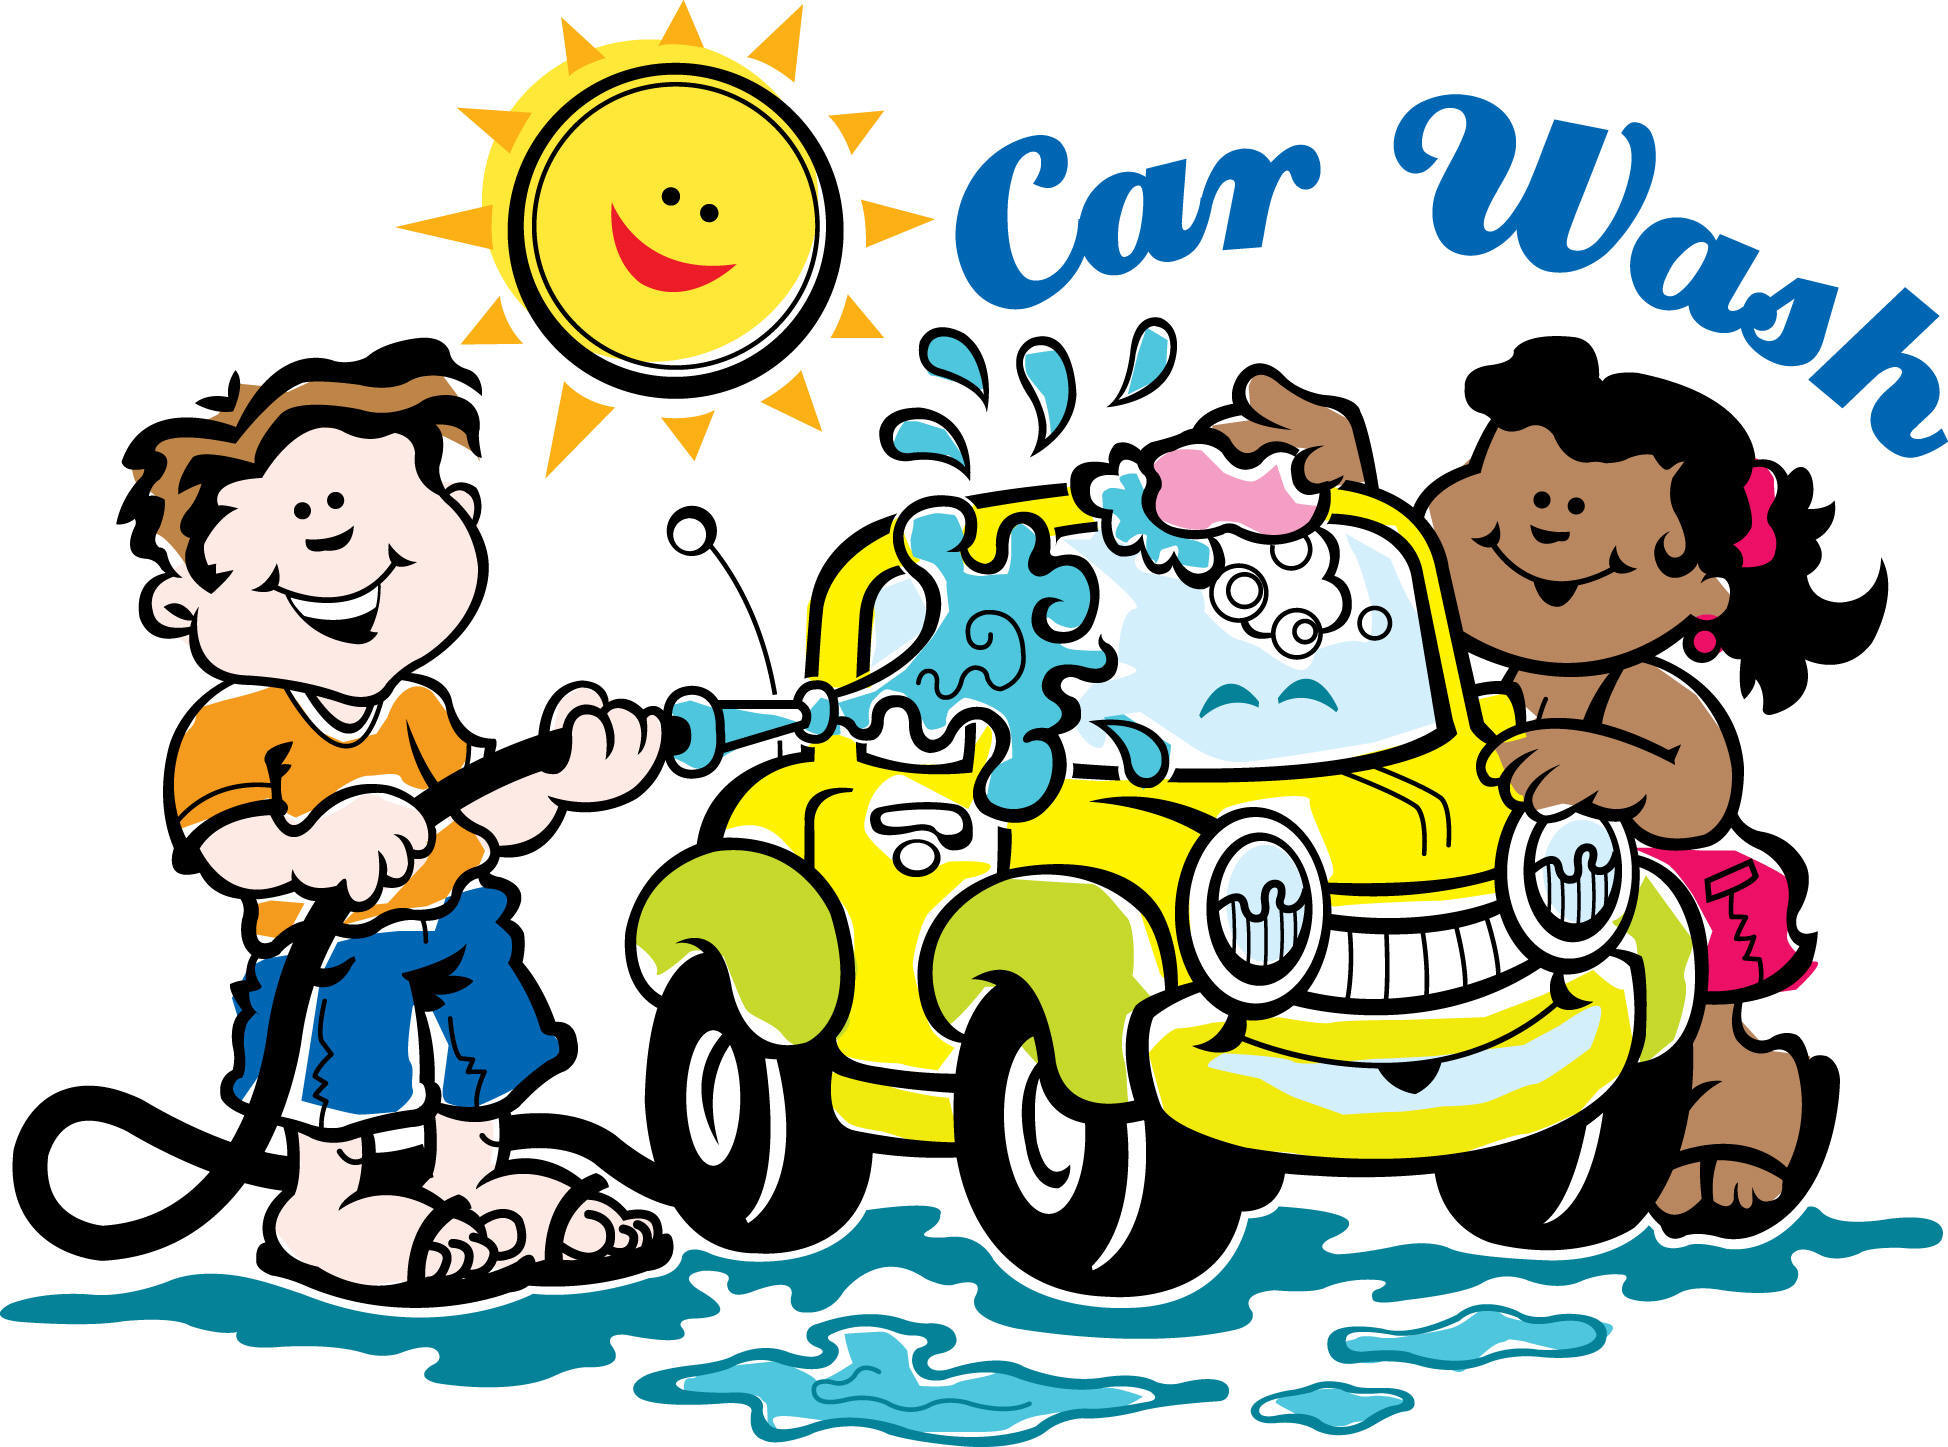 Tomorrow After School Free The Children Will Be Hosting A Car Wash